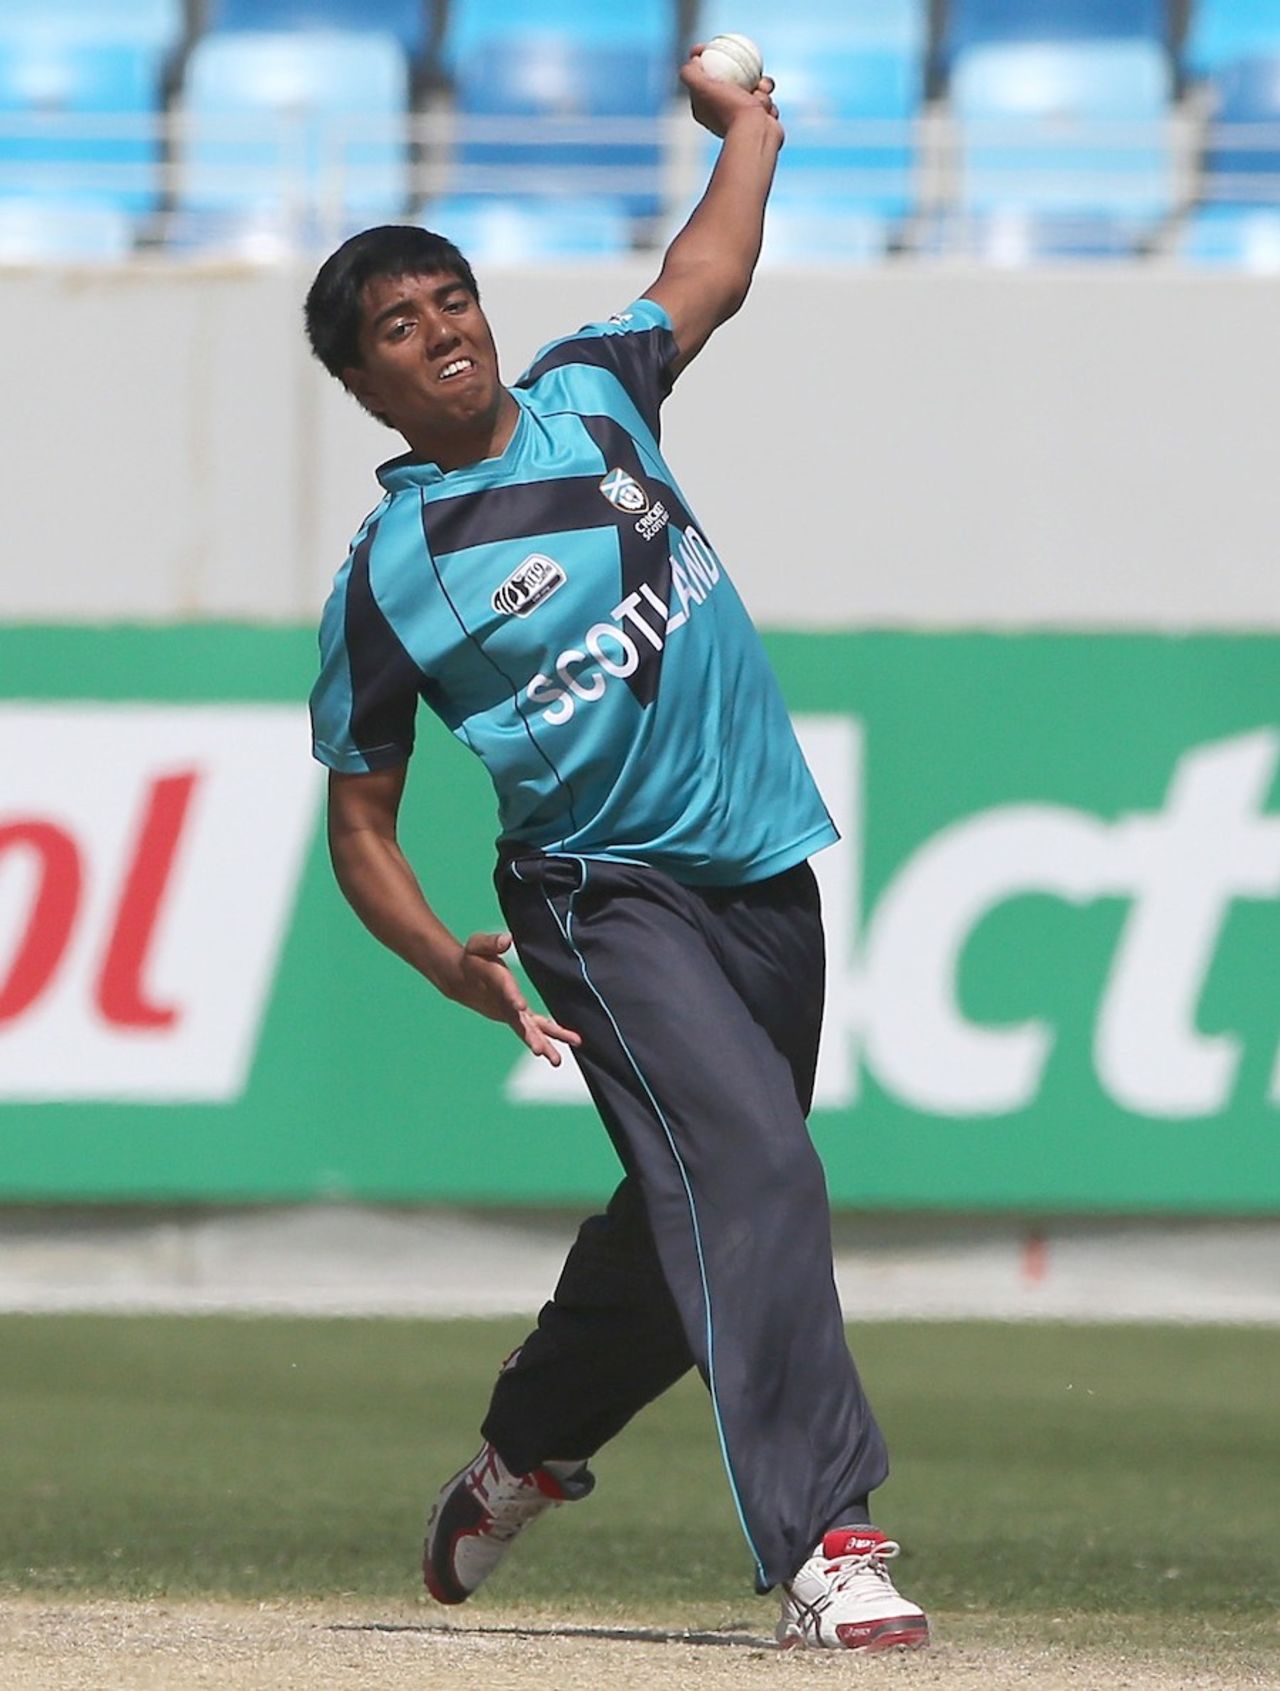 Chayank Gosain in delivery stride, India Under-19s v Scotland Under-19s, Under-19 World Cup, Dubai, February 17, 2014